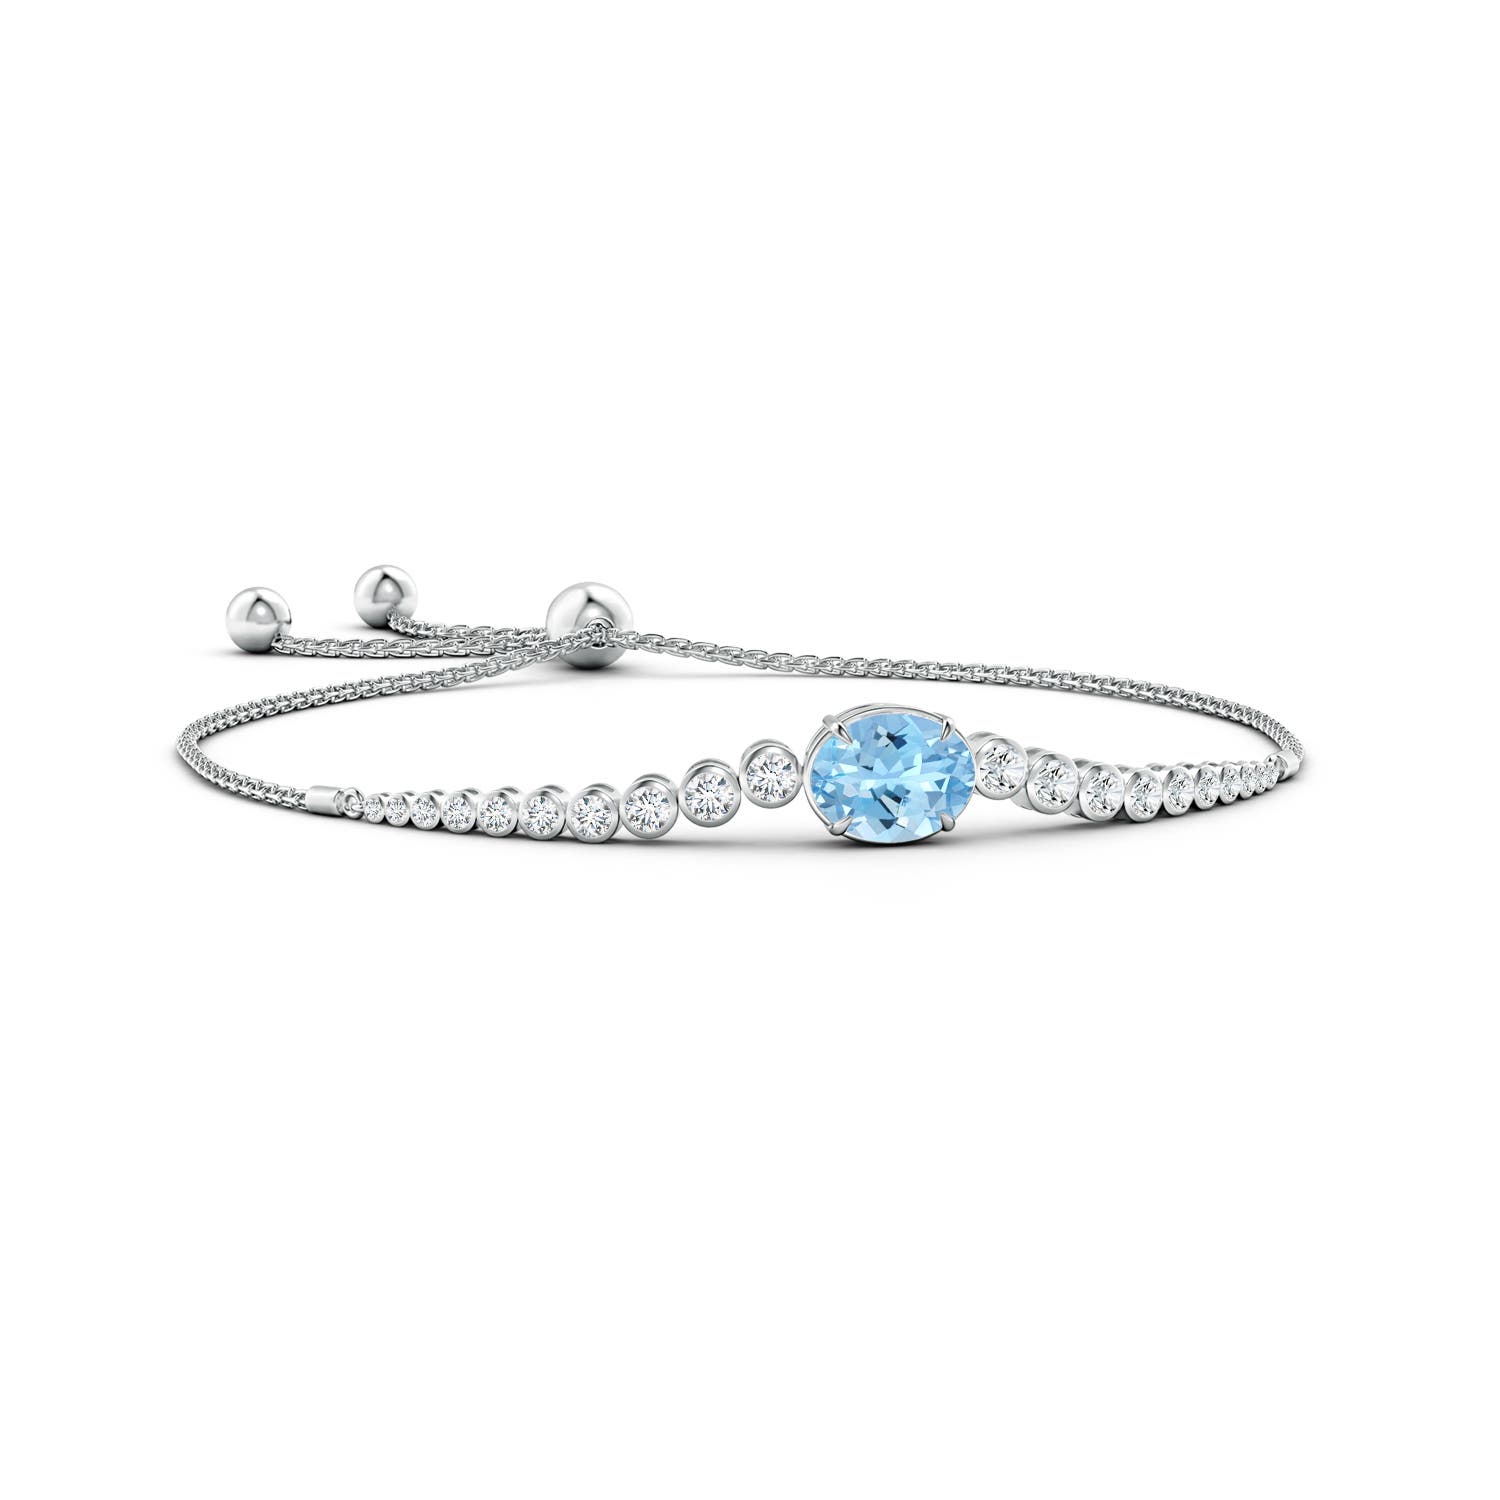 Oval Aquamarine Lace Link Bracelet in White Gold | Borsheims